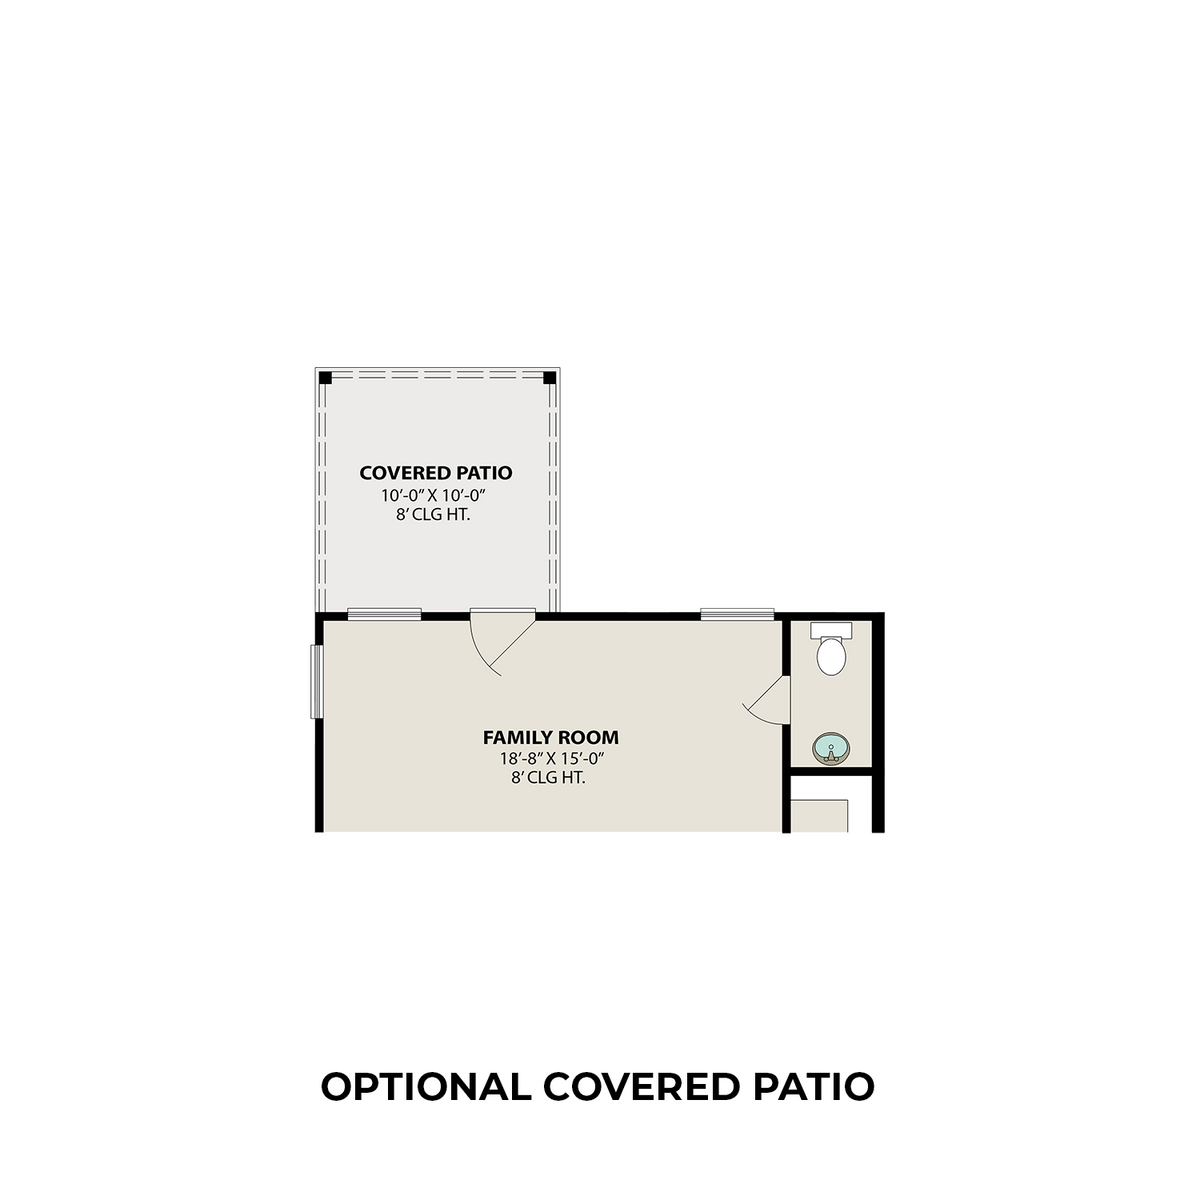 3 - The Lily B buildable floor plan layout in Davidson Homes' Haven at Kieth Harrow community.